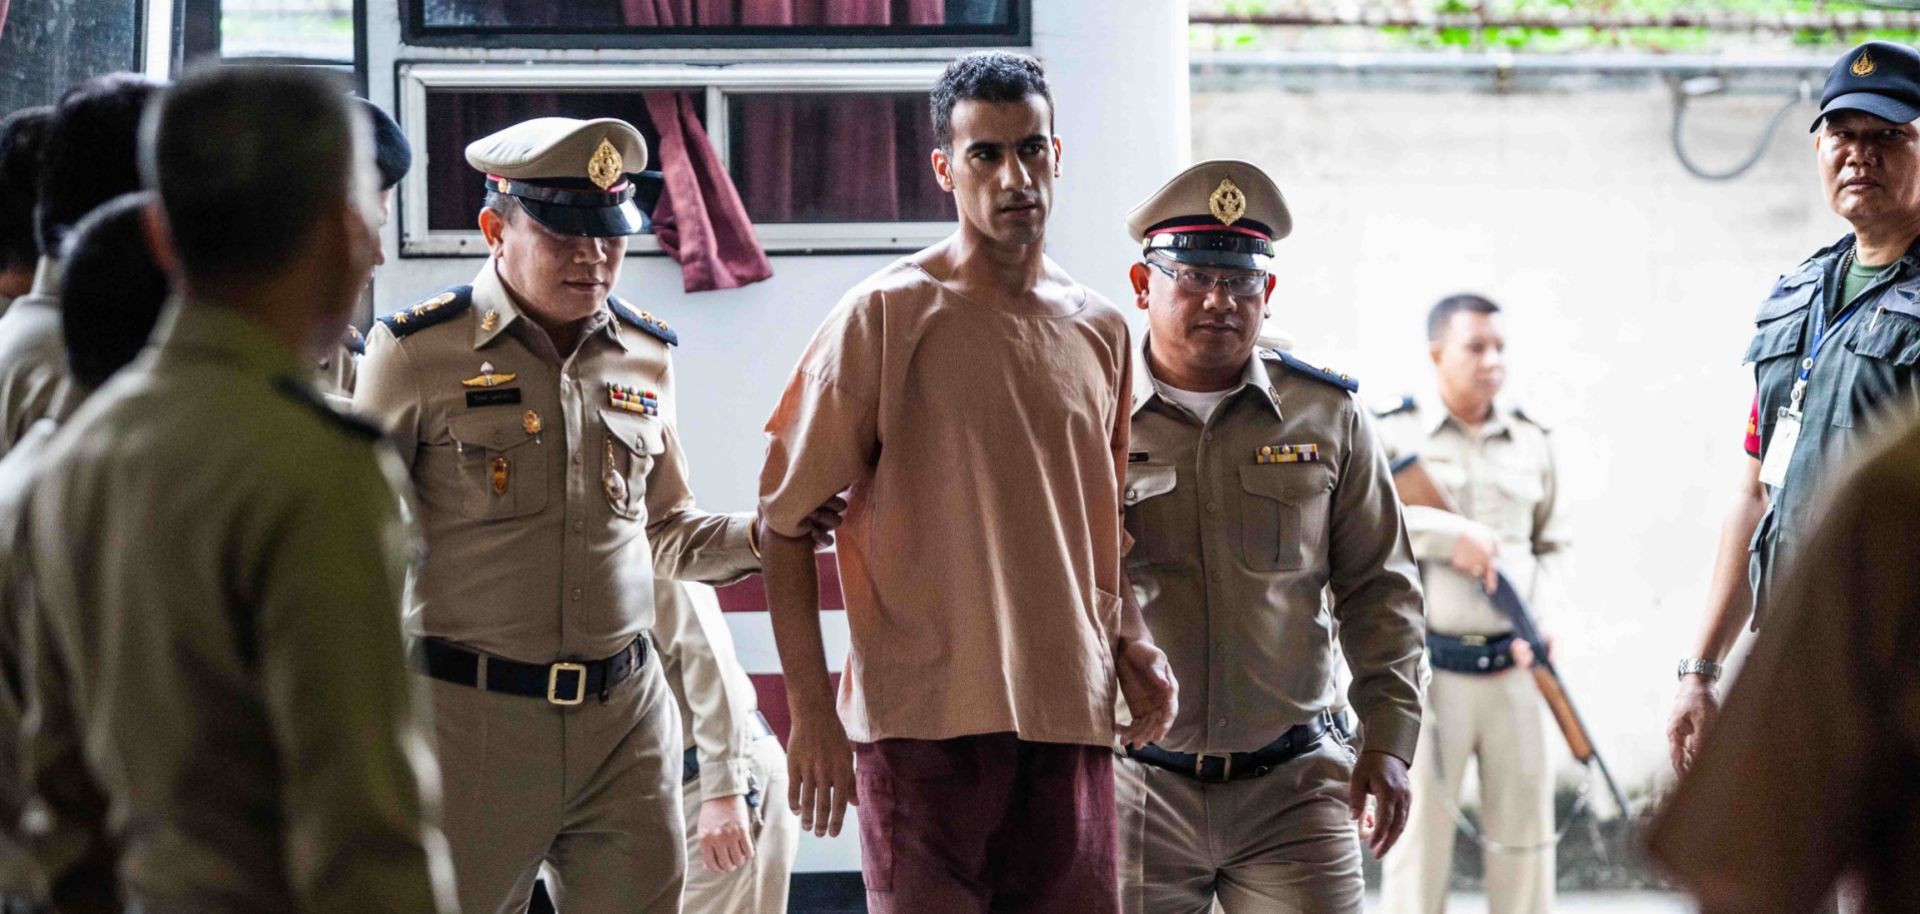 Soccer player Hakeem al-Araibi, who is facing extradition from Thailand to Bahrain, arrives for a court hearing in Bangkok on Feb. 4, 2019.